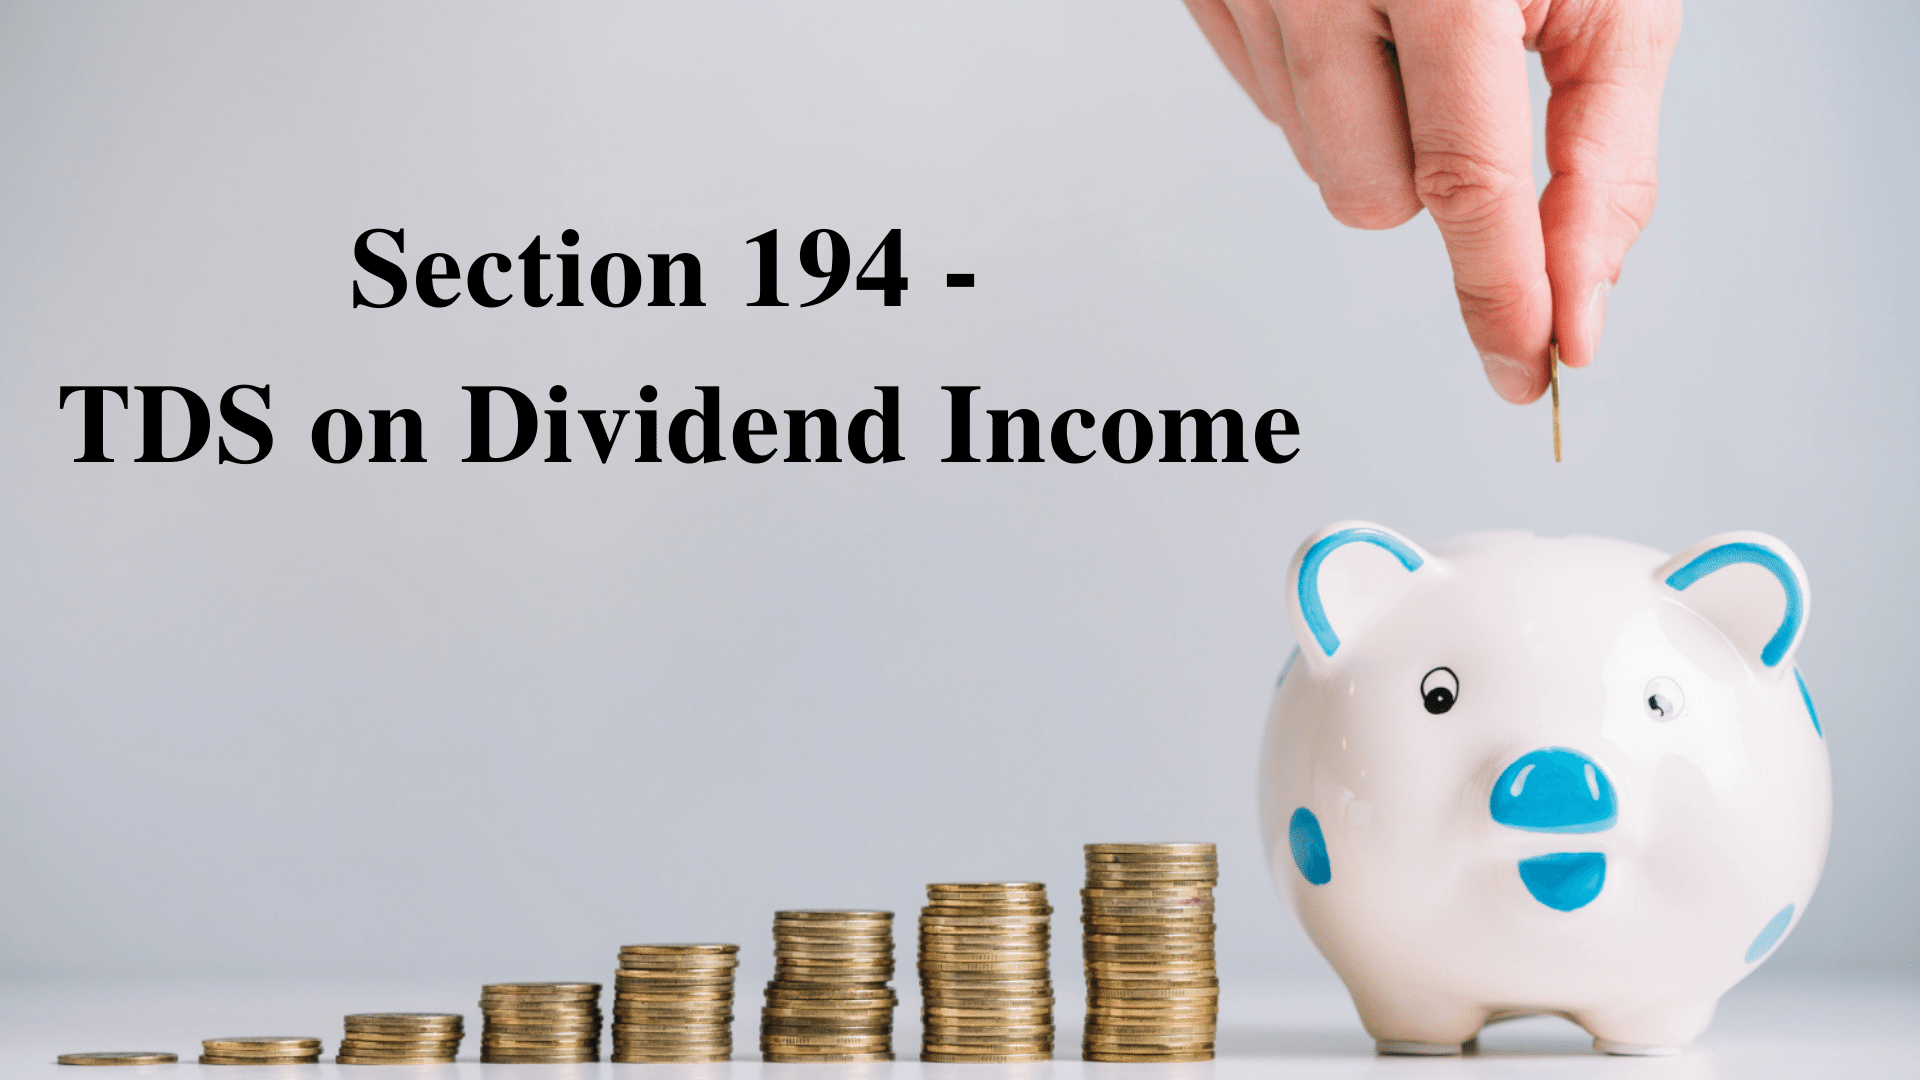 Section 194 of Income Tax Act - TDS on Dividend Income